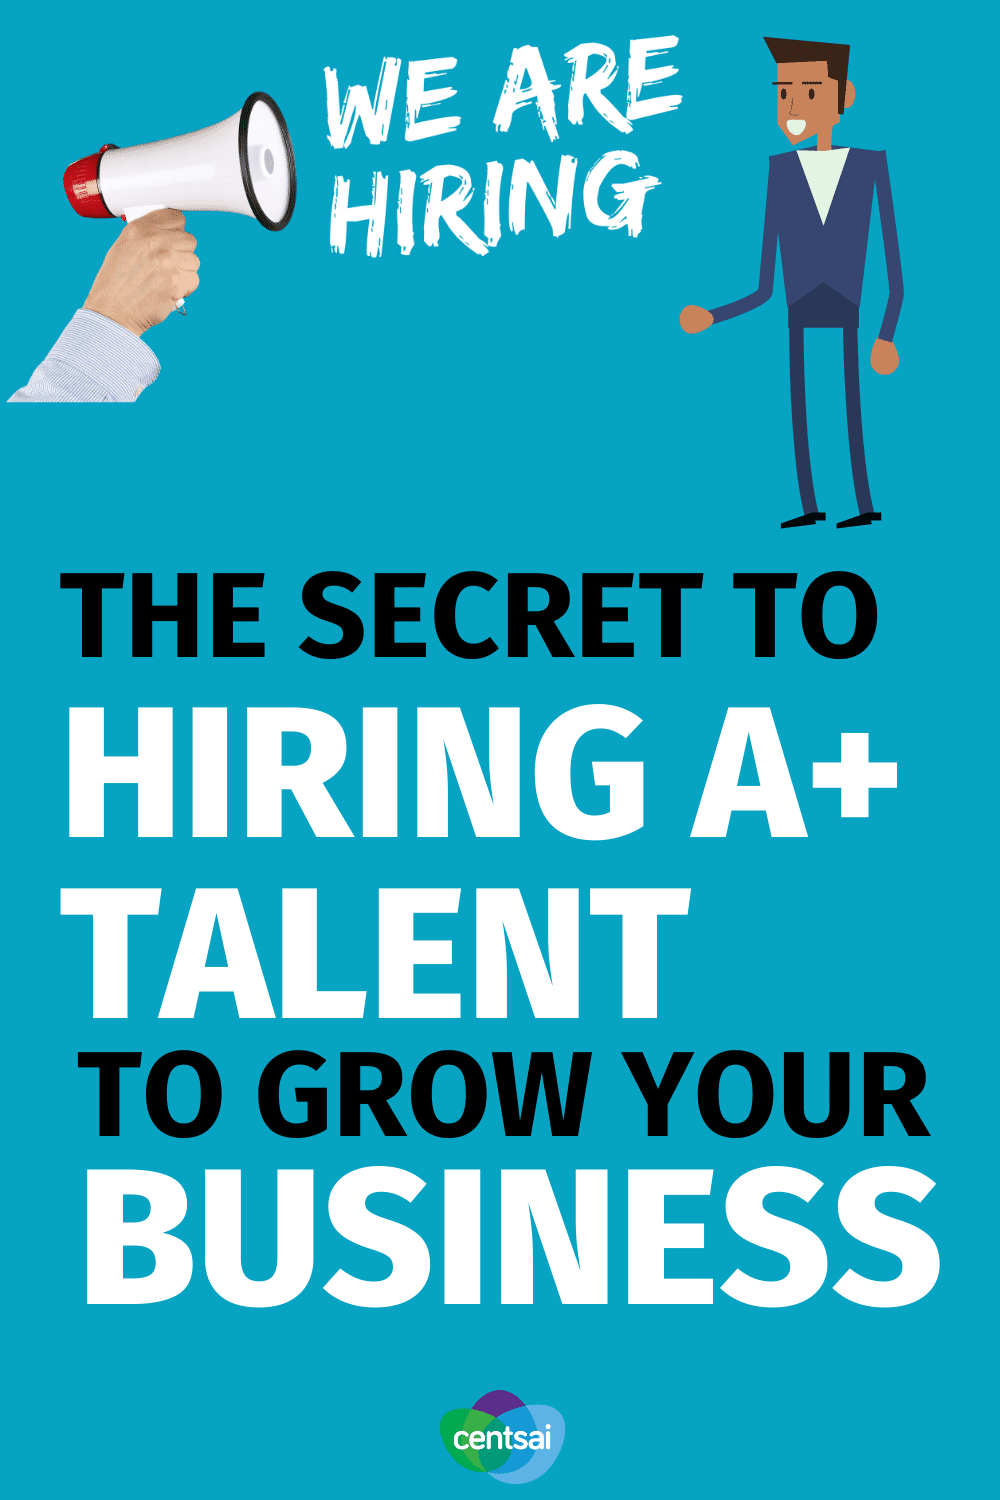 The Secret to Hiring A+ Talent to Grow Your Business